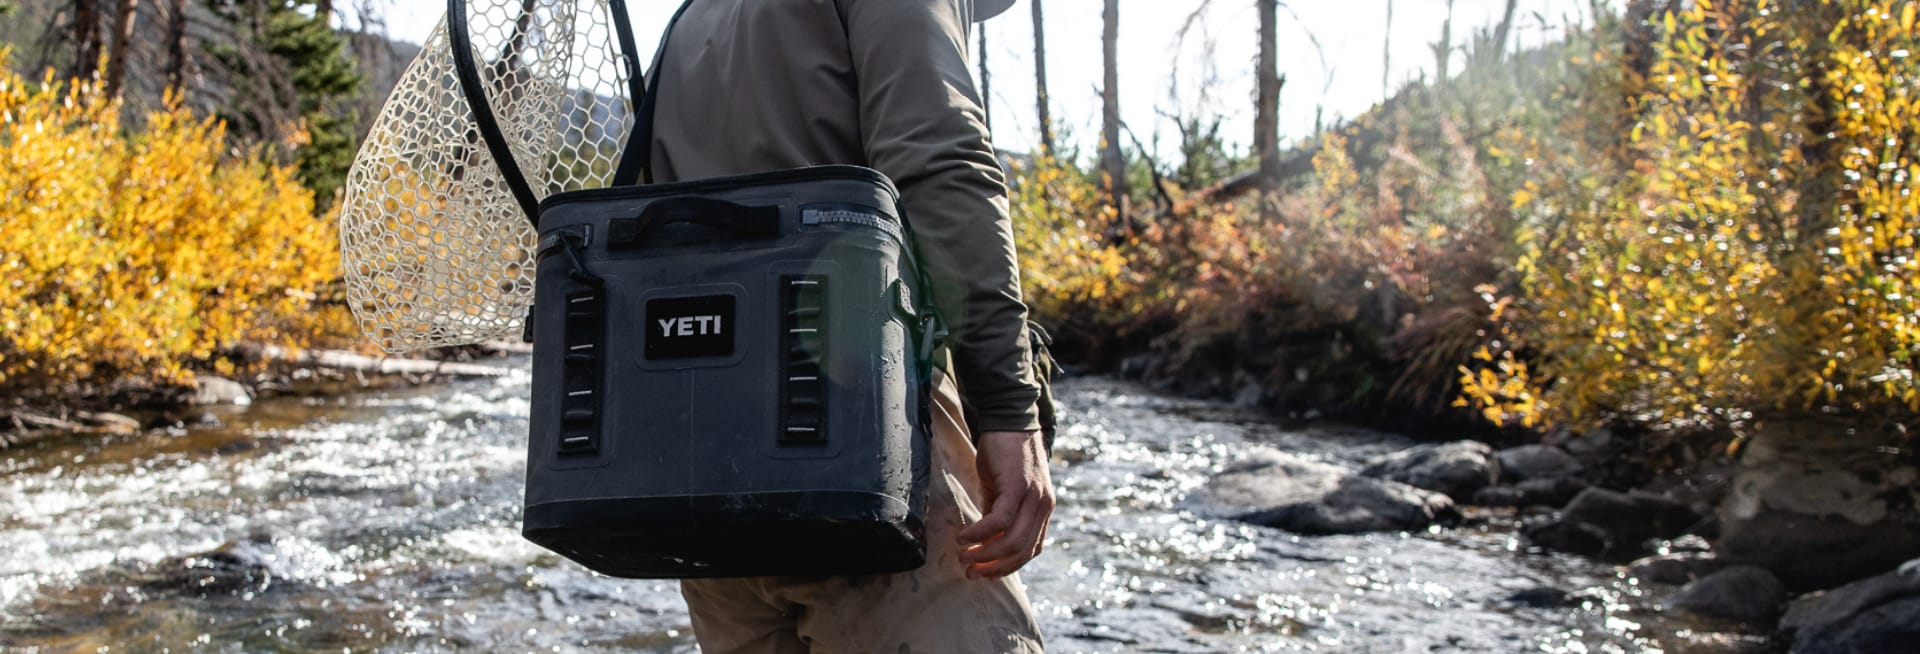 a man with net and YETI cooler in river